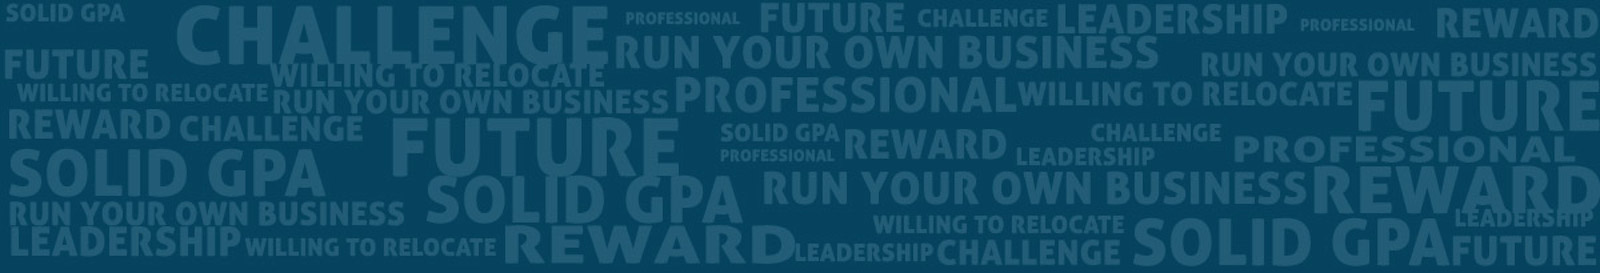 banner with collage of text containing the words, challenge, professional, future, leadership, reward, run your own business, solid gpa